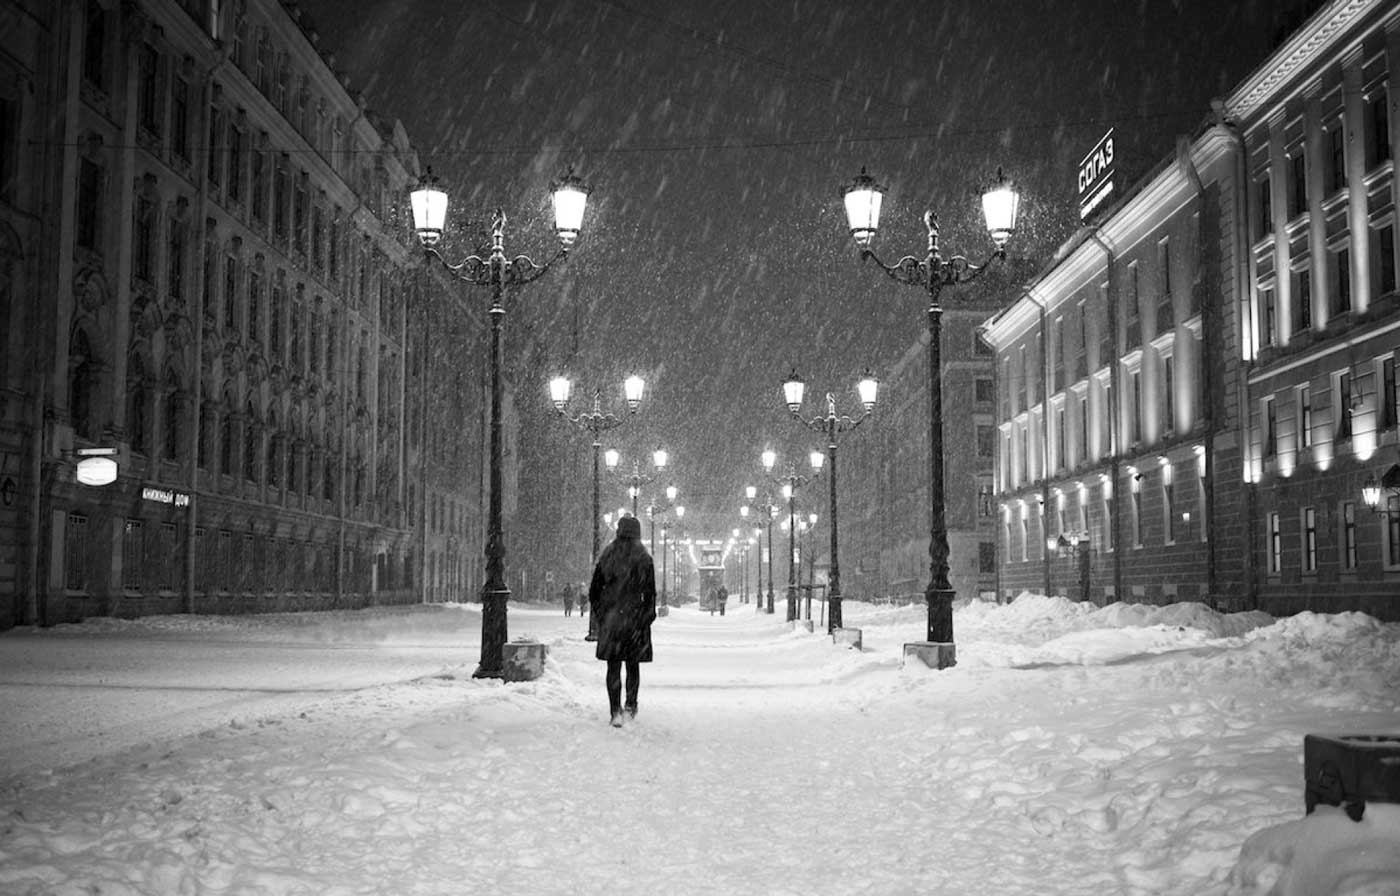 Snowstorm in Moscow at night